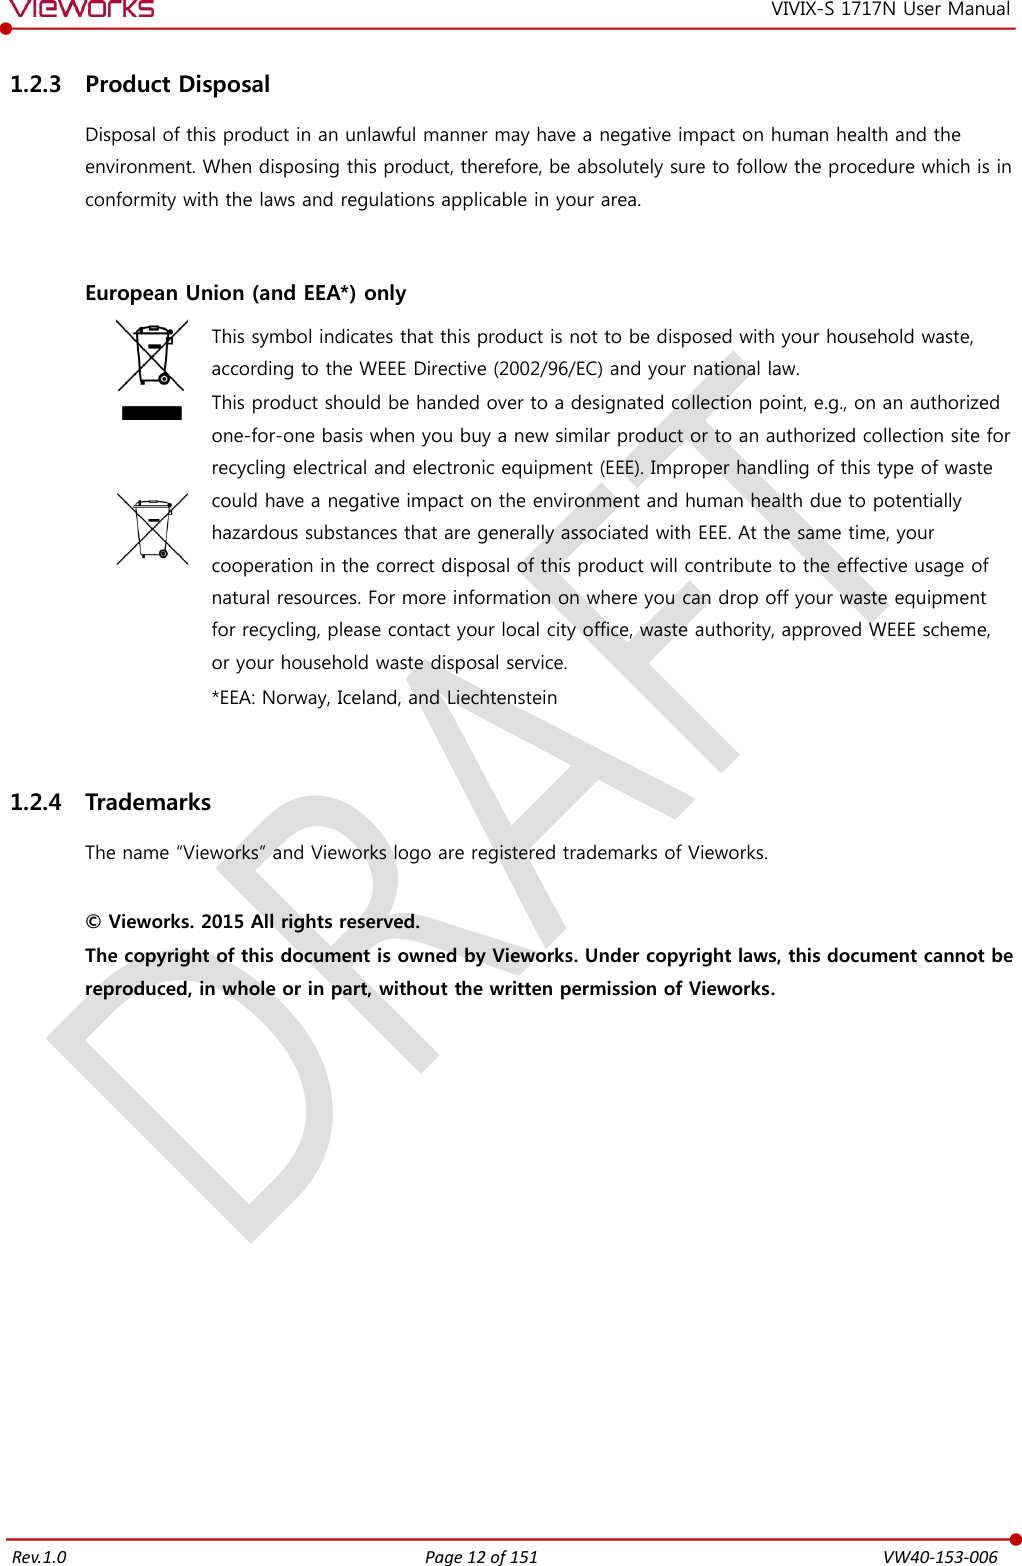   Rev.1.0 Page 12 of 151  VW40-153-006 VIVIX-S 1717N User Manual 1.2.3 Product Disposal Disposal of this product in an unlawful manner may have a negative impact on human health and the environment. When disposing this product, therefore, be absolutely sure to follow the procedure which is in conformity with the laws and regulations applicable in your area.   European Union (and EEA*) only     This symbol indicates that this product is not to be disposed with your household waste, according to the WEEE Directive (2002/96/EC) and your national law. This product should be handed over to a designated collection point, e.g., on an authorized one-for-one basis when you buy a new similar product or to an authorized collection site for recycling electrical and electronic equipment (EEE). Improper handling of this type of waste could have a negative impact on the environment and human health due to potentially hazardous substances that are generally associated with EEE. At the same time, your cooperation in the correct disposal of this product will contribute to the effective usage of natural resources. For more information on where you can drop off your waste equipment for recycling, please contact your local city office, waste authority, approved WEEE scheme, or your household waste disposal service. *EEA: Norway, Iceland, and Liechtenstein  1.2.4 Trademarks The name “Vieworks” and Vieworks logo are registered trademarks of Vieworks.  © Vieworks. 2015 All rights reserved. The copyright of this document is owned by Vieworks. Under copyright laws, this document cannot be reproduced, in whole or in part, without the written permission of Vieworks.   